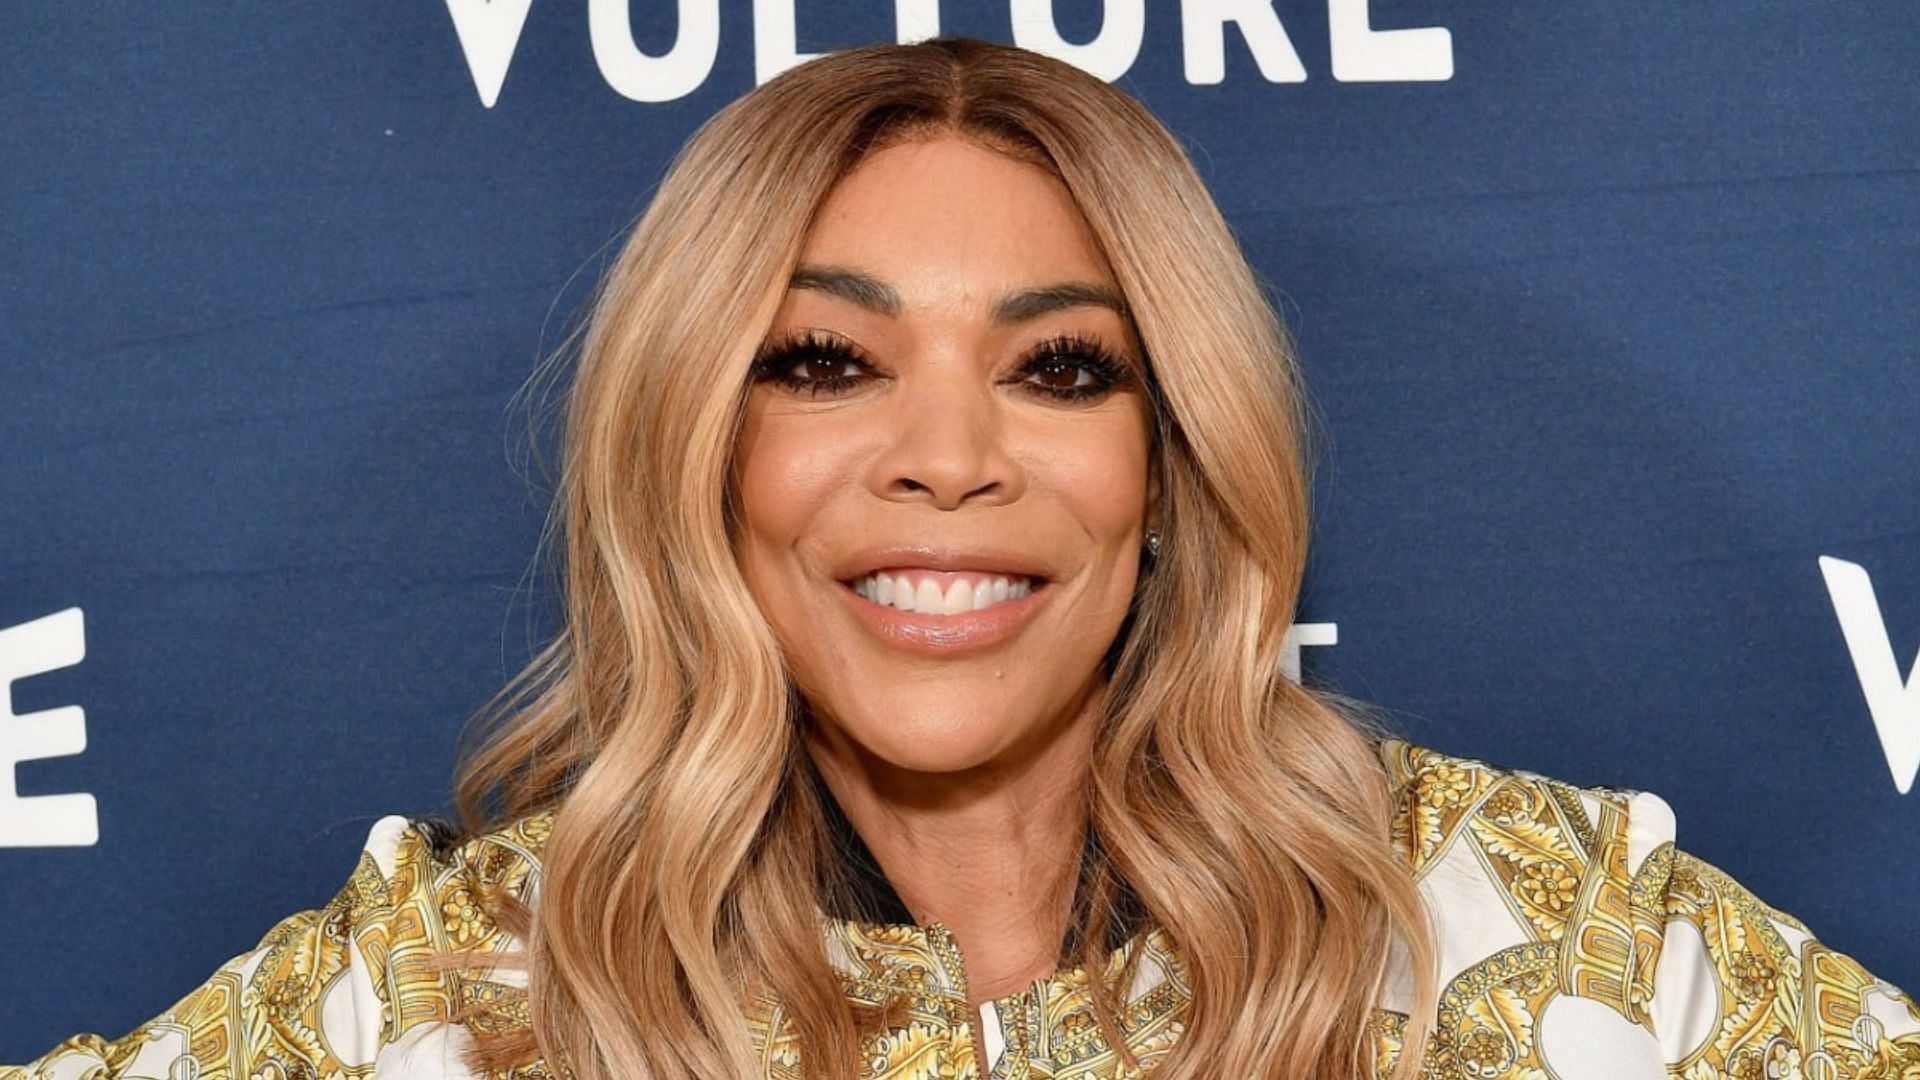 Wendy Williams update Talk show host opens up on health issues, legal